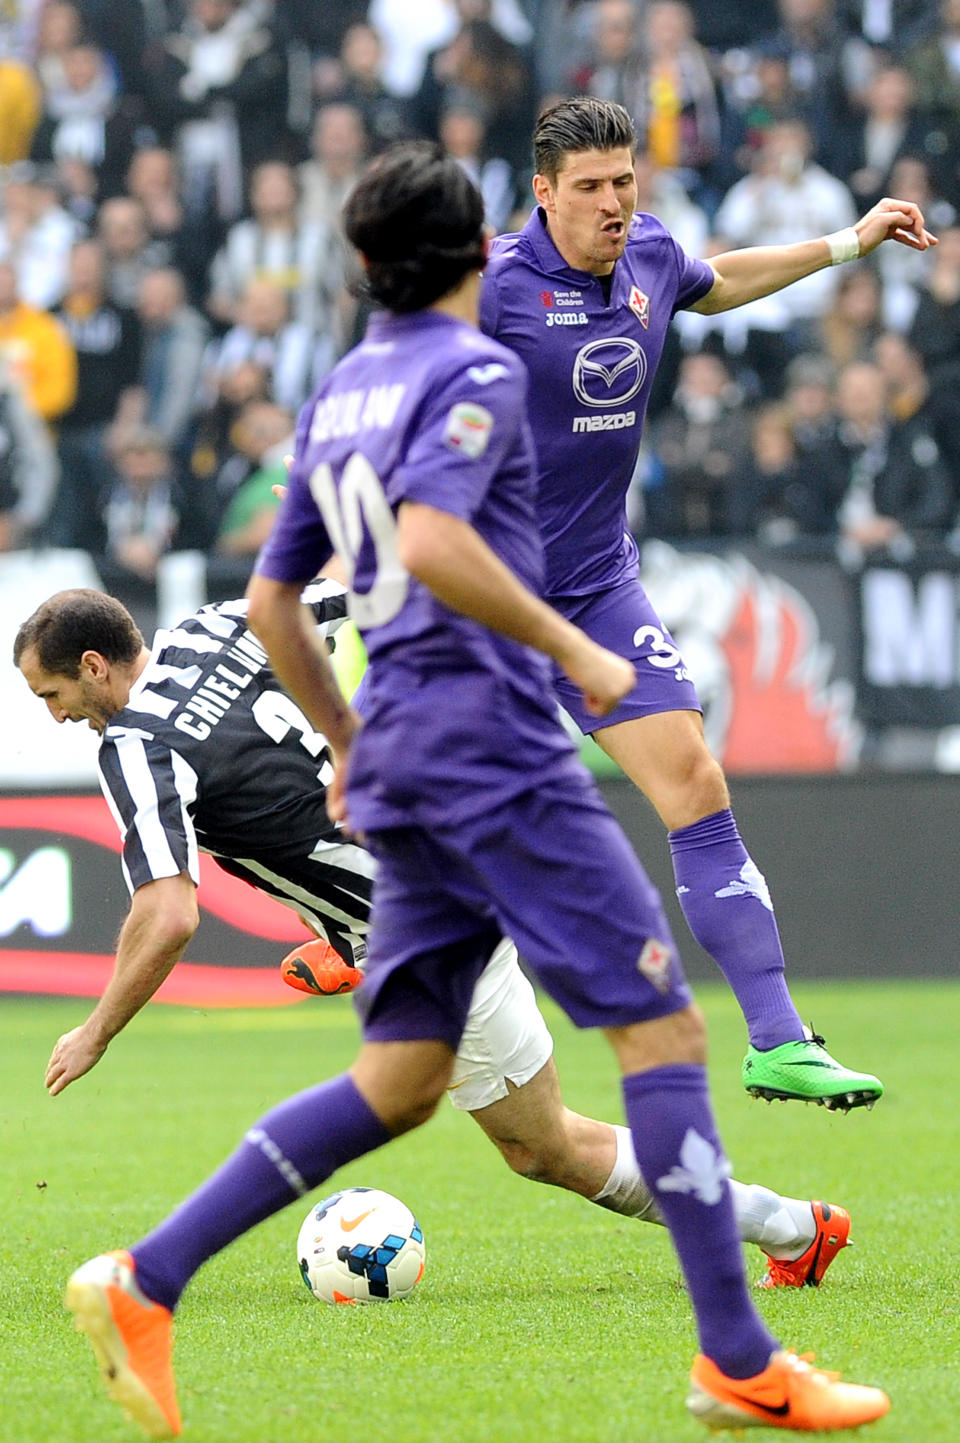 Fiorentina's Mario Gomez challenges the ball with Juventus defender Giorgio Chiellini during a Serie A soccer match between Juventus and Fiorentina at the Juventus stadium, in Turin, Italy, Sunday, Mar. 9, 2014. (AP Photo/Massimo Pinca)